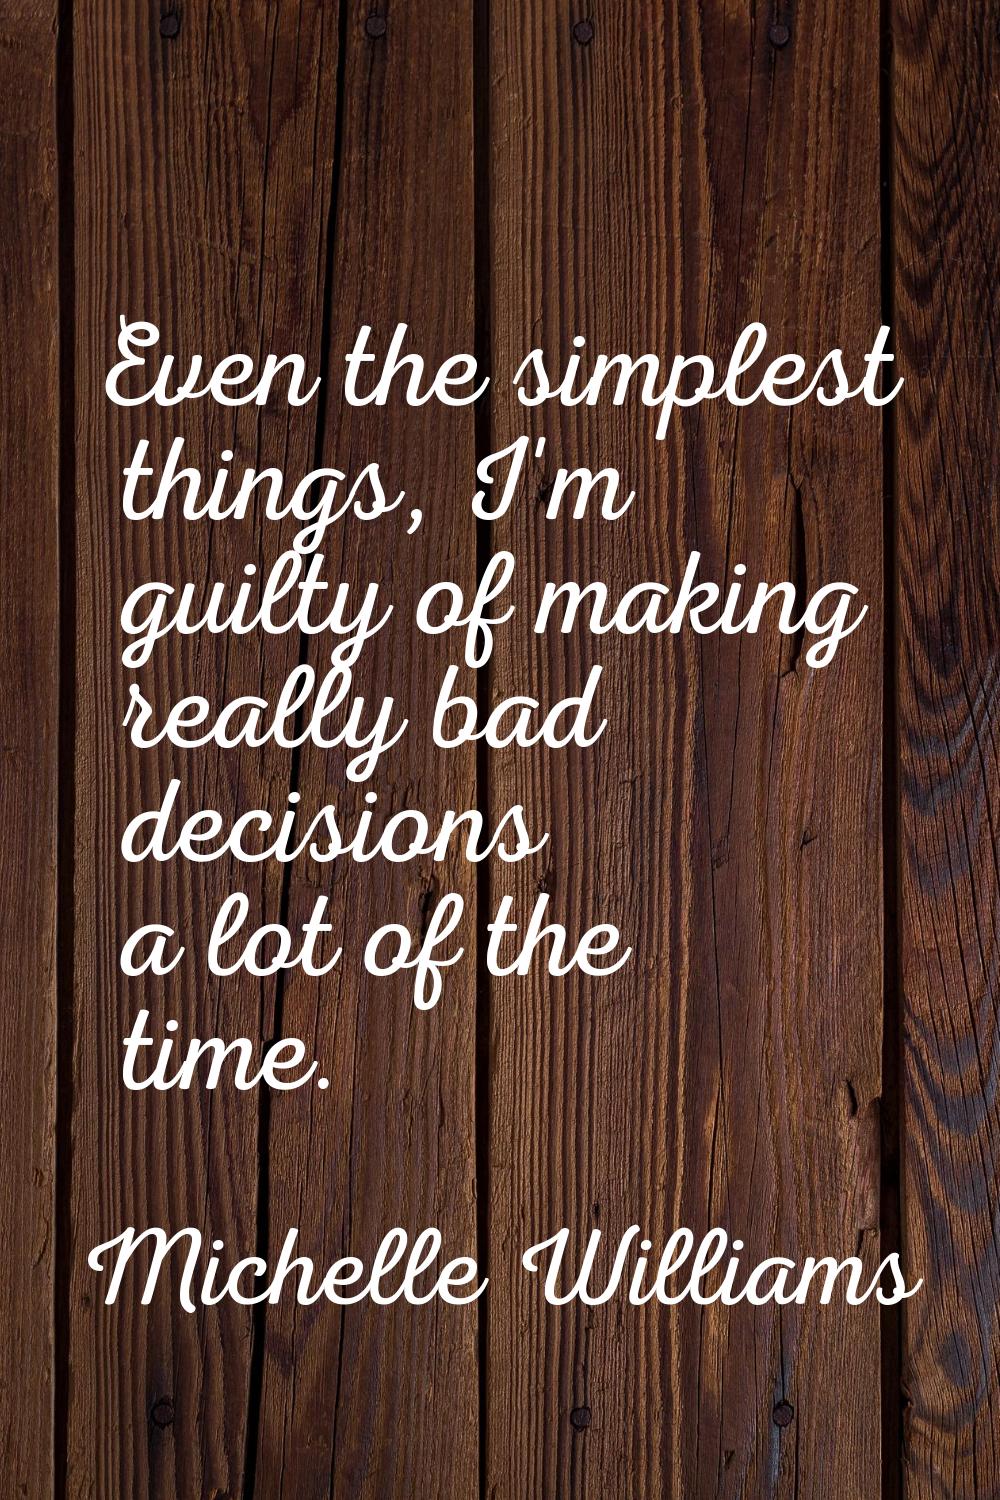 Even the simplest things, I'm guilty of making really bad decisions a lot of the time.